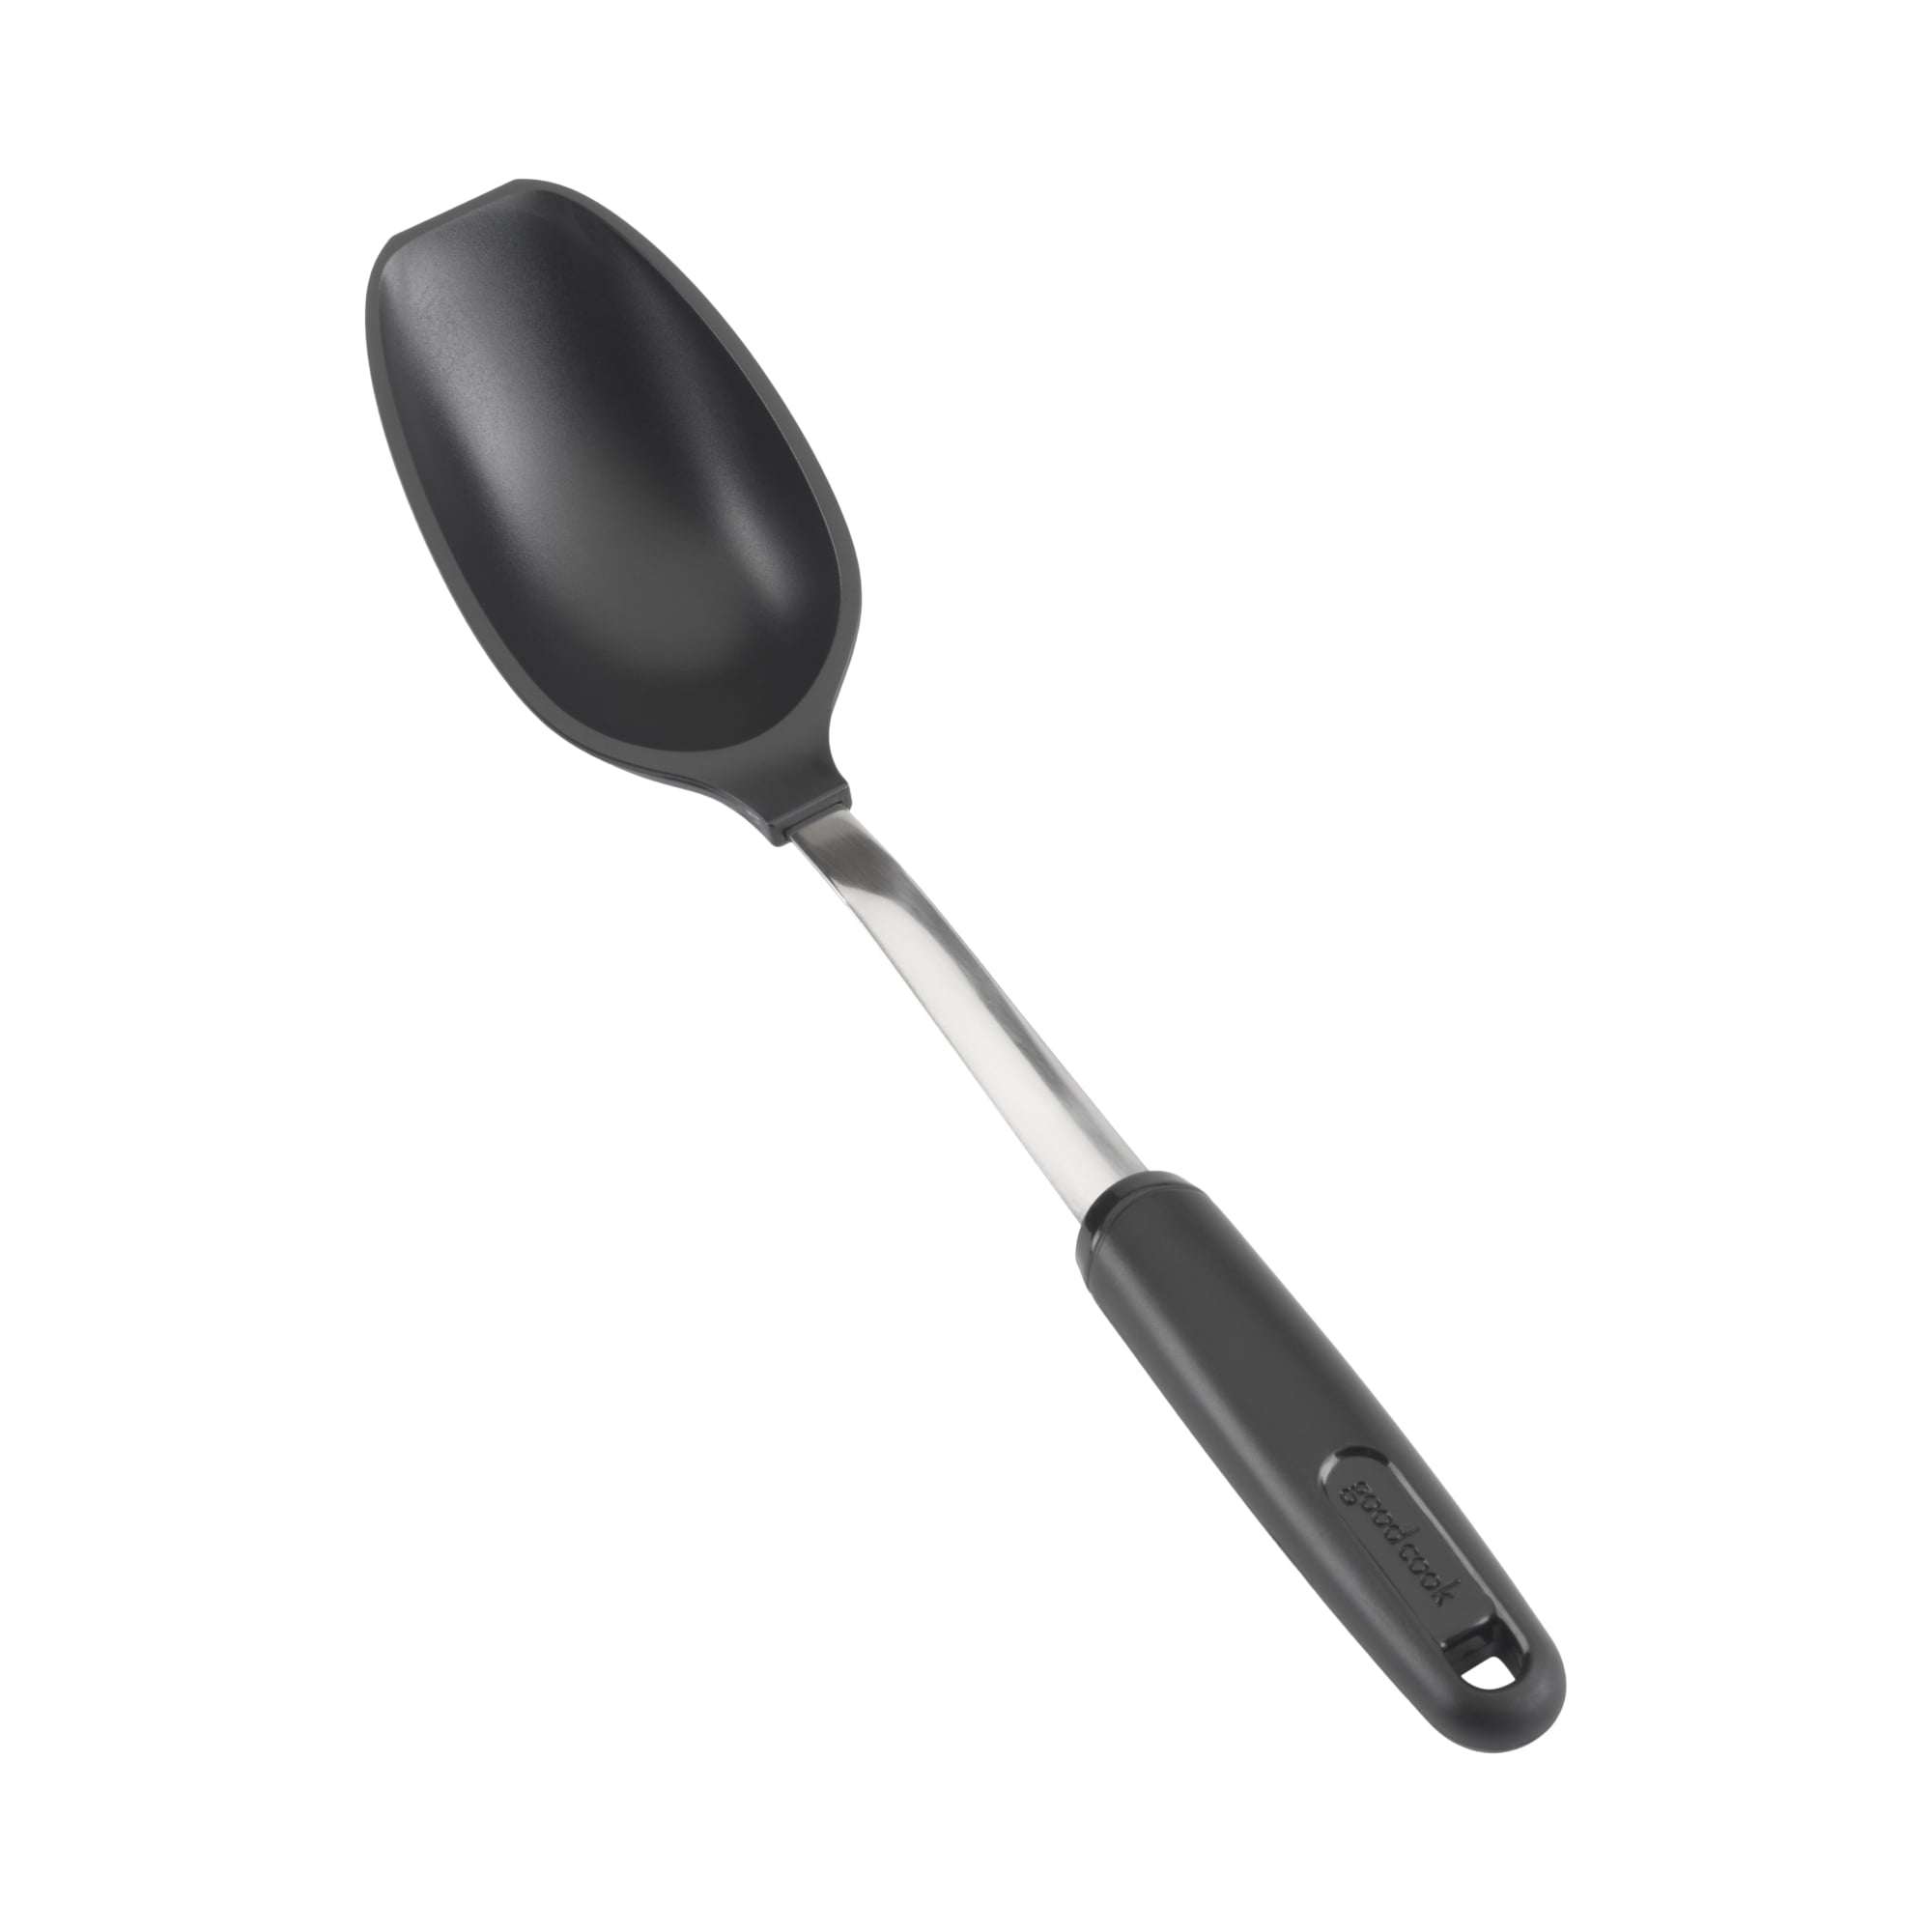 GoodCook Hi-Temp Serving and Cooking Nylon Basting Spoon